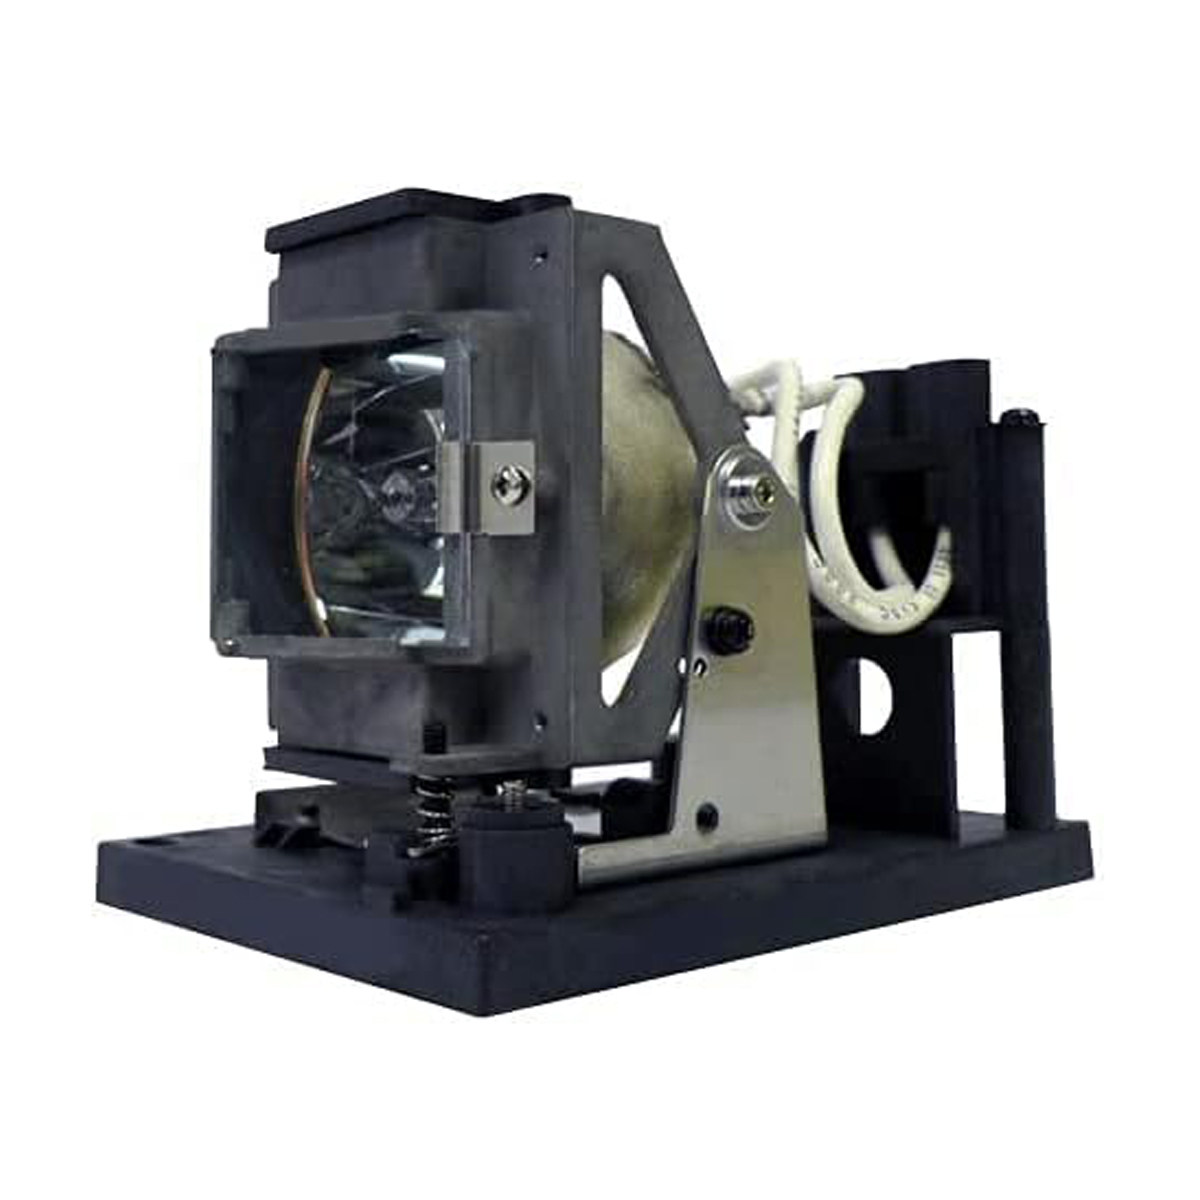 Replacement Projector lamp AH-45001（left）For EIKI EIP-4500 EIP-4500L